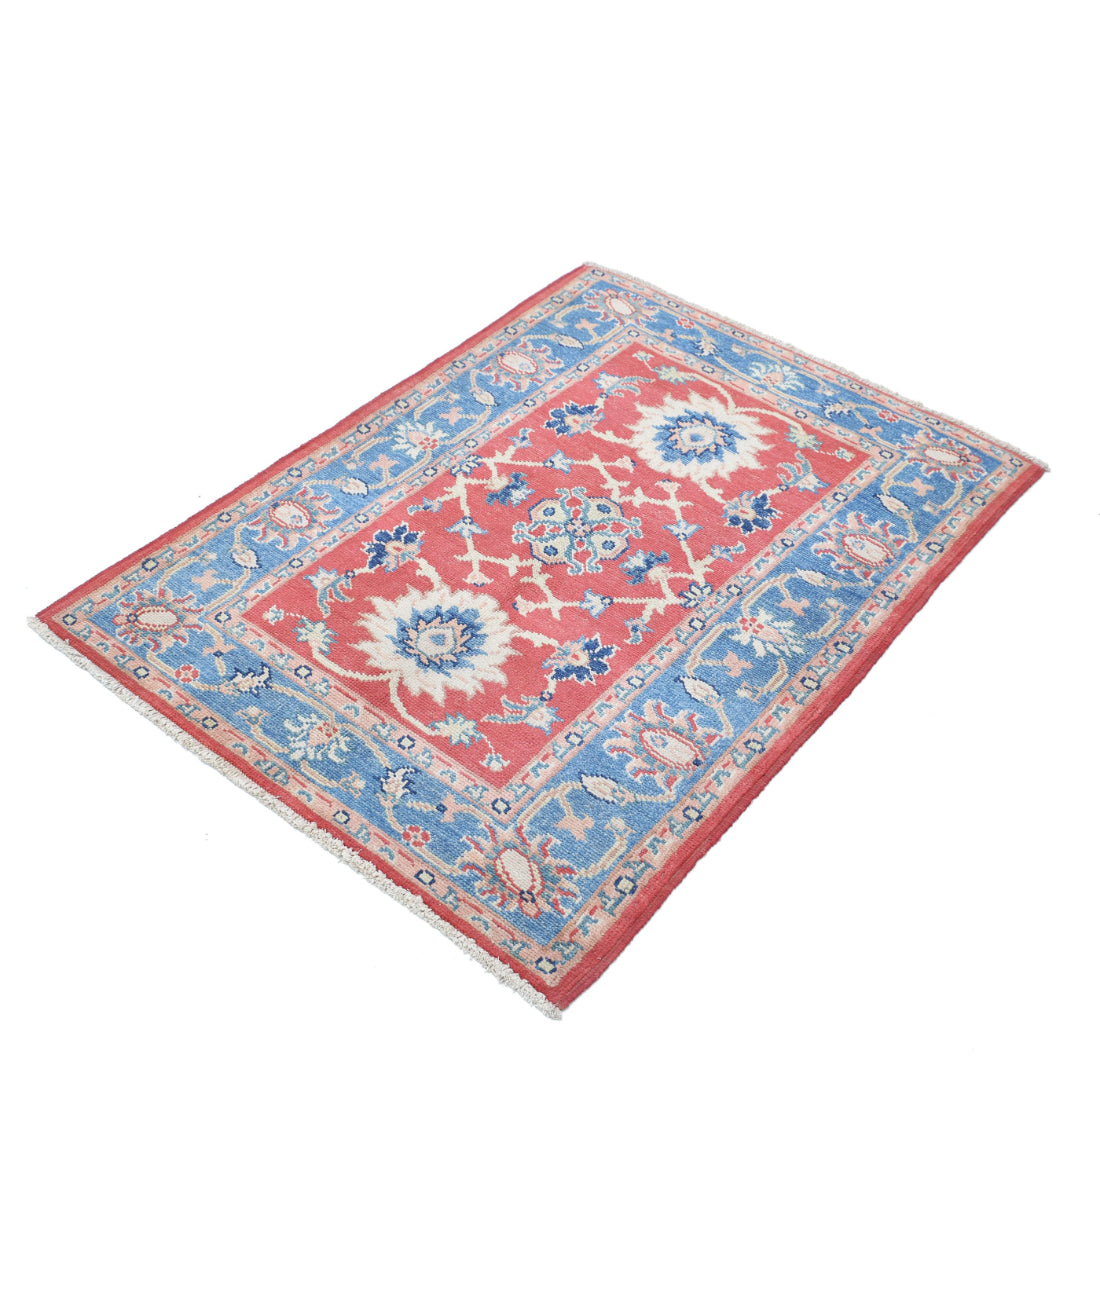 Ziegler 3'1'' X 4'2'' Hand-Knotted Wool Rug 3'1'' x 4'2'' (93 X 125) / Red / Blue